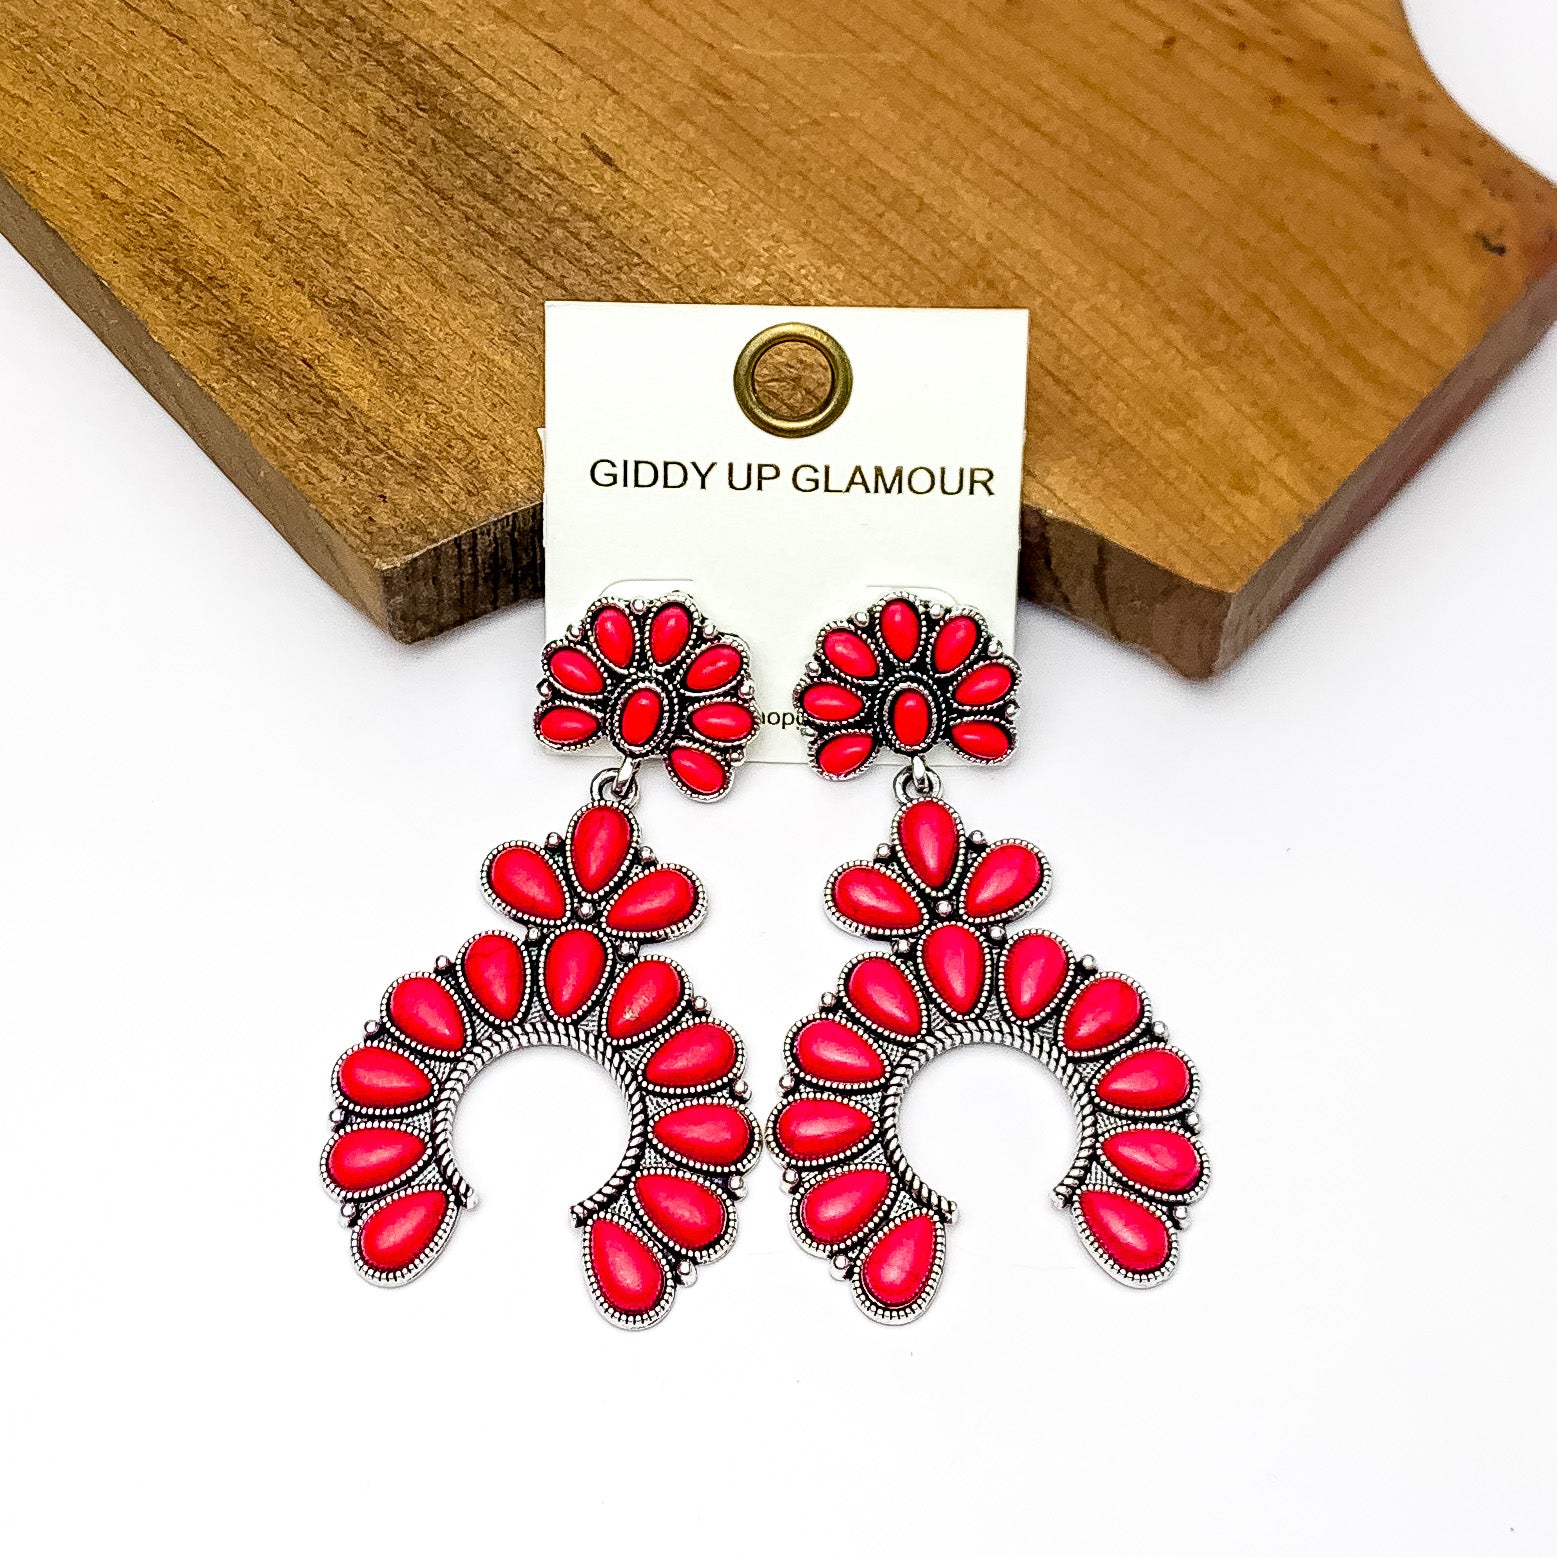 Western Naja Earrings in Silver Tone with Red Stones. Pictured on a white background with a wood piece behind the earrings.